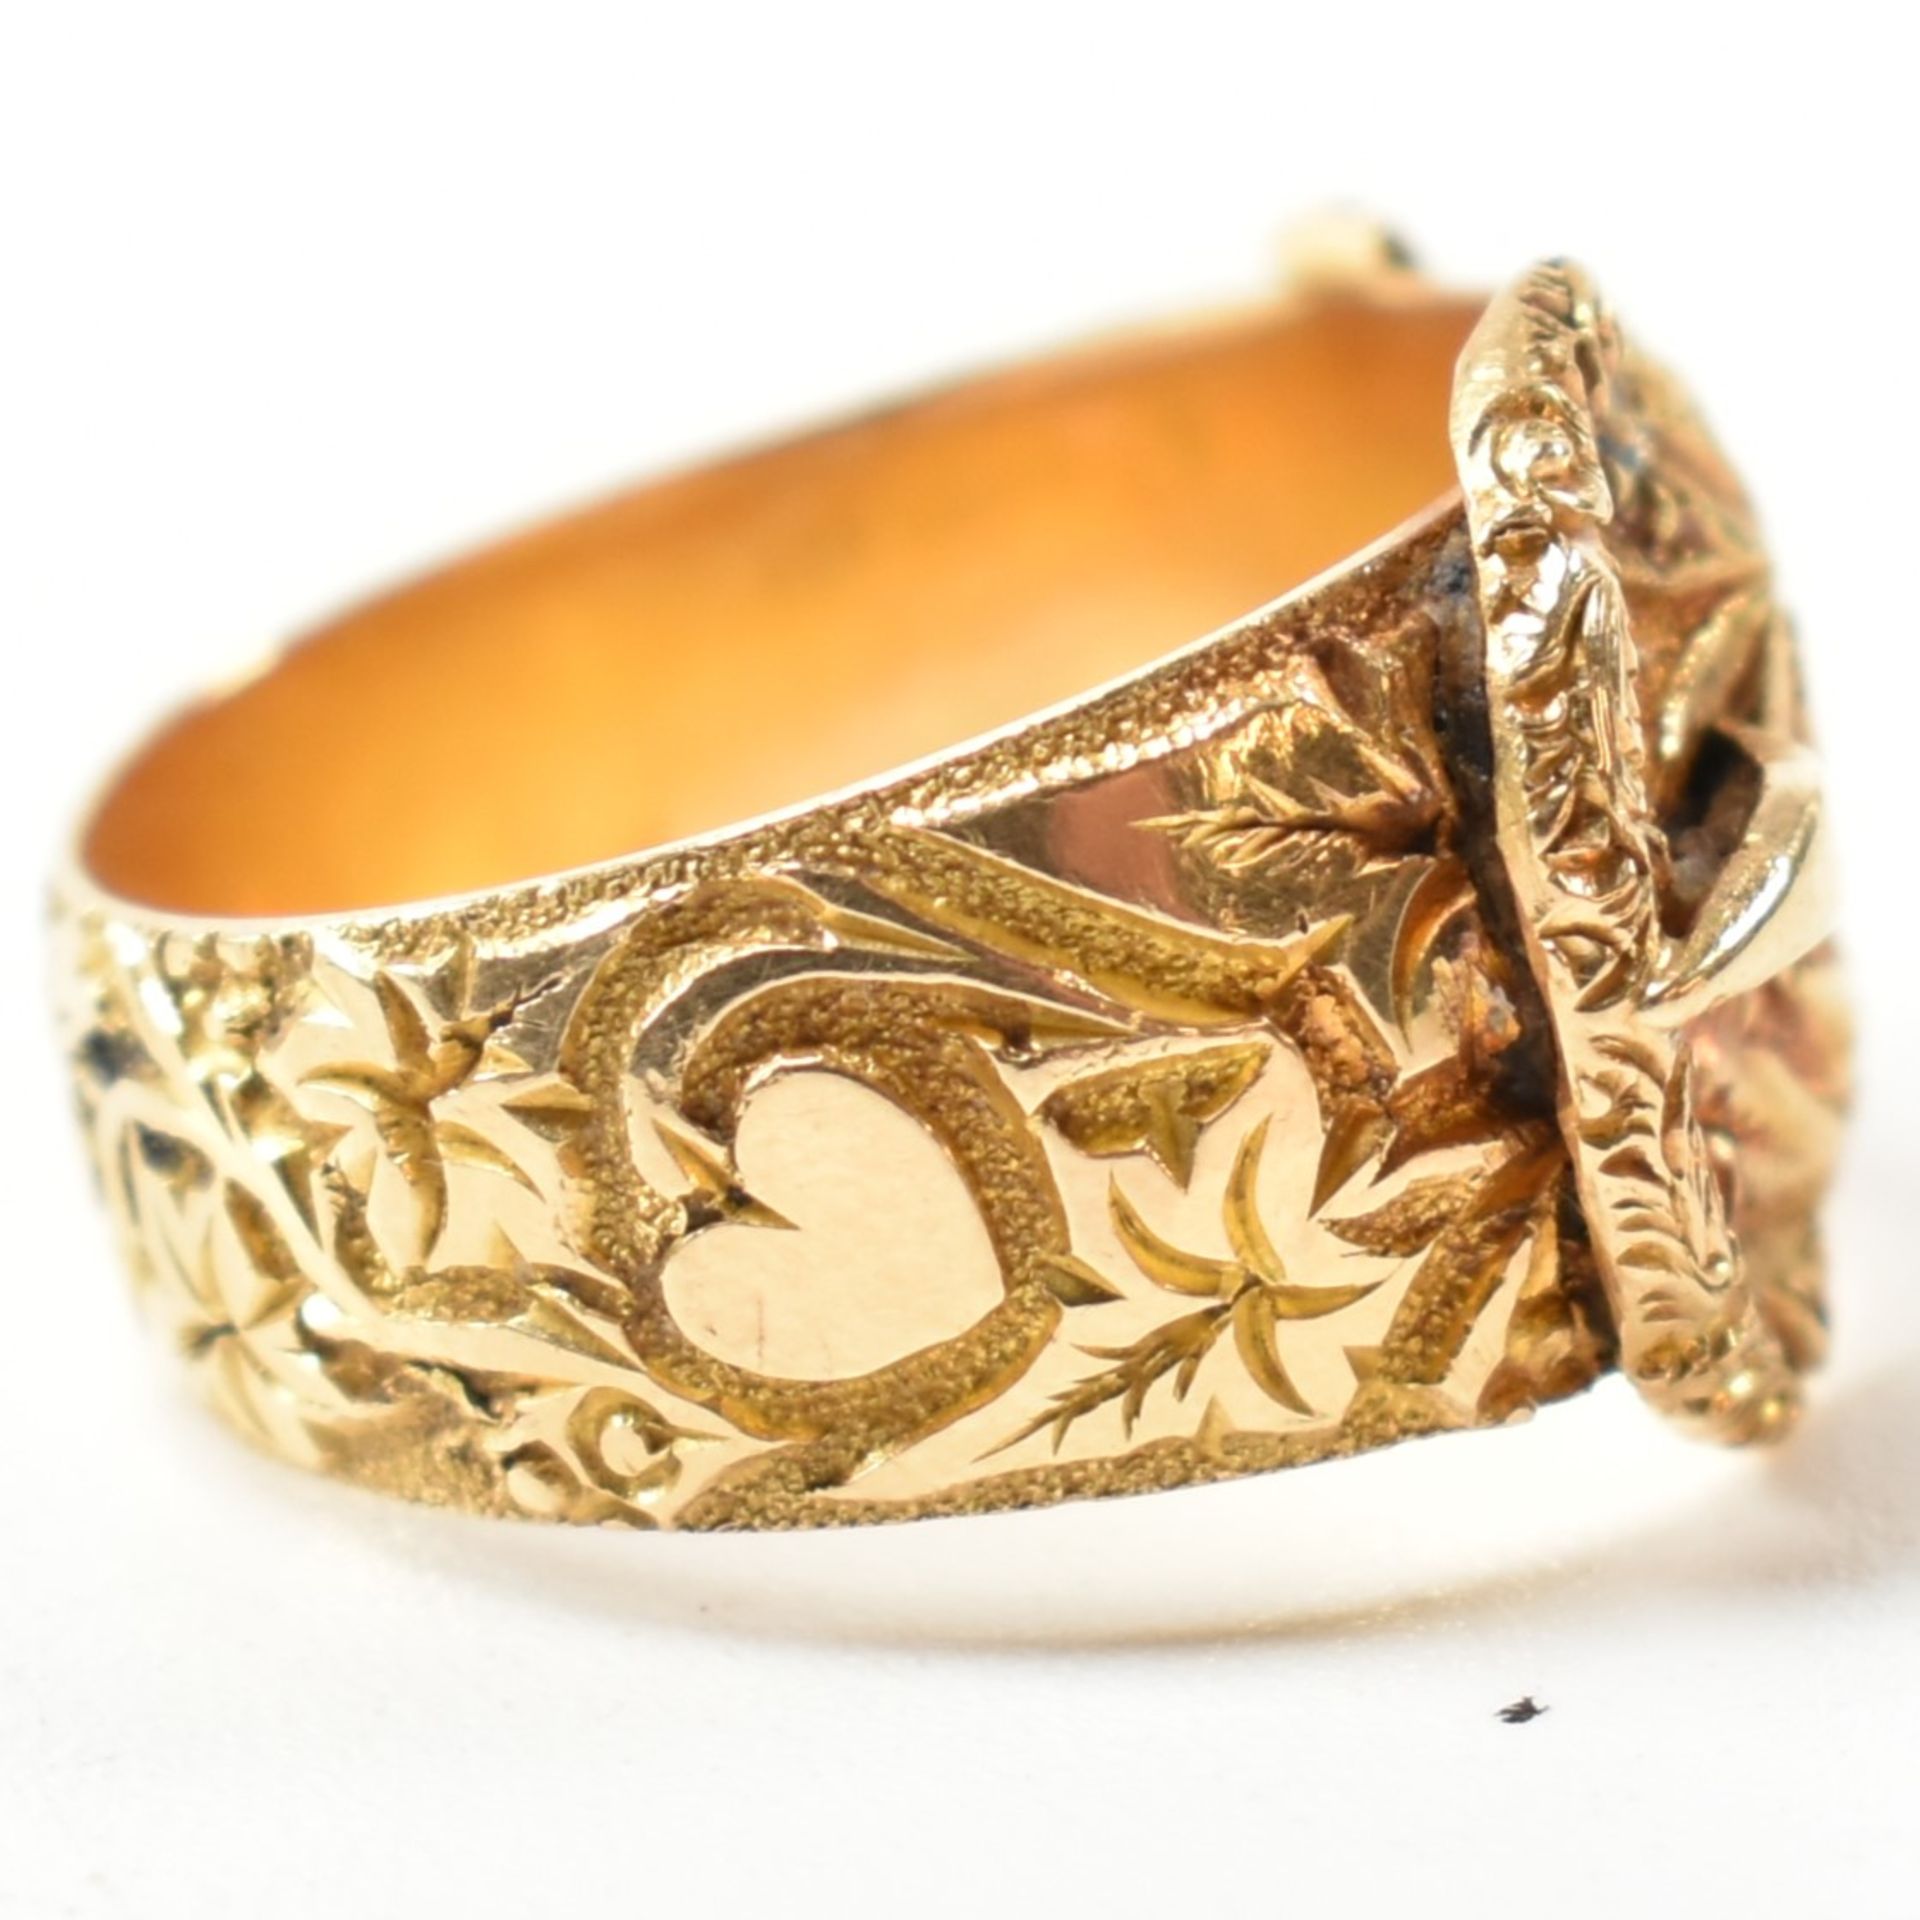 EDWARDIAN HALLMARKED 18CT GOLD BUCKLE RING - Image 5 of 9